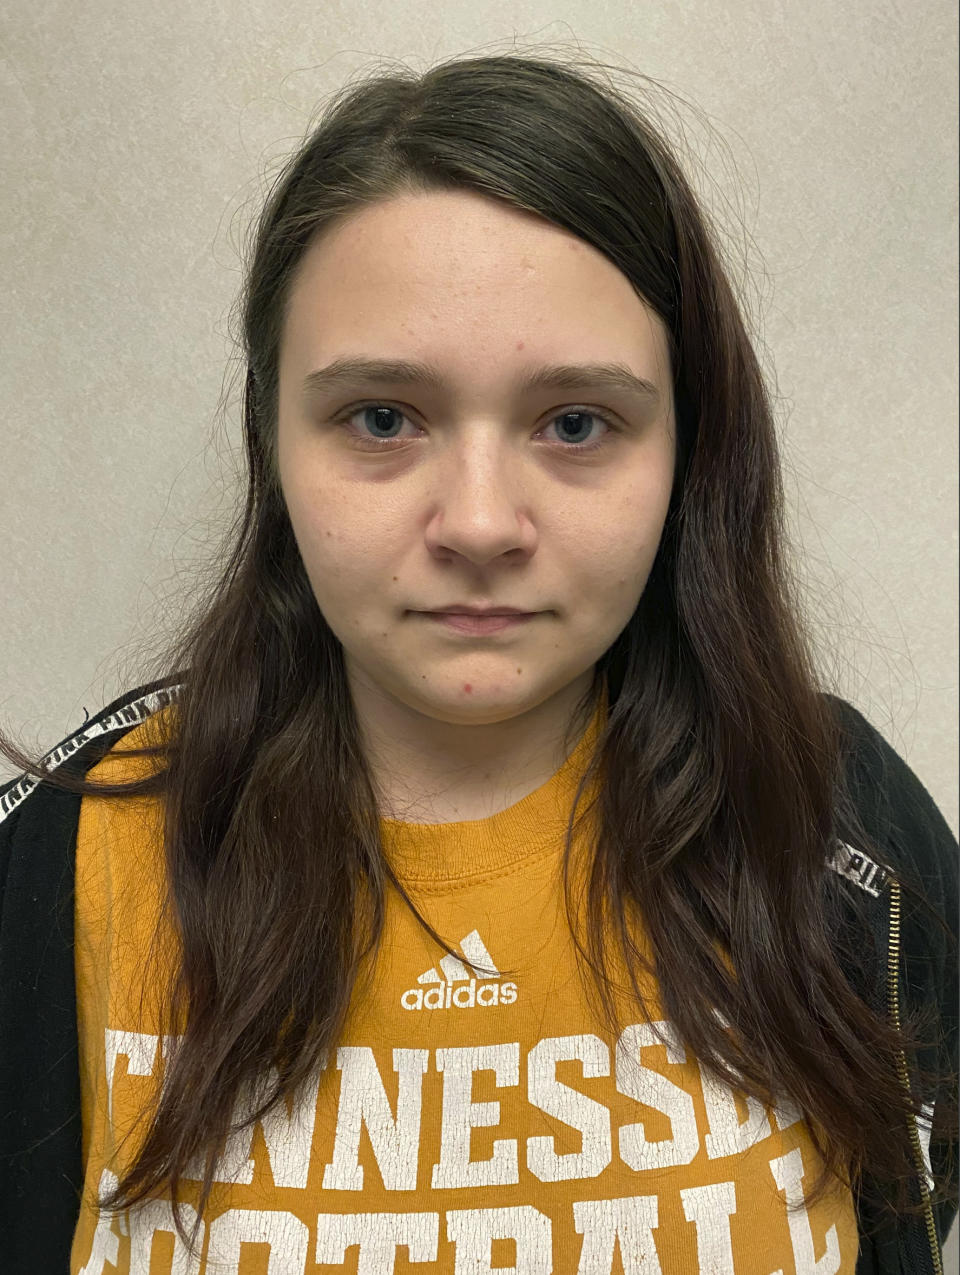 This February 2020 booking photo from the Tennessee Bureau of Investigation shows Megan Boswell. The teen mother of a 15-month-old Tennessee girl, who is the subject of an Amber Alert, is being held on a false report charge, according to the Sullivan County Sheriff's Office. (Tennessee Bureau of Investigation via AP)